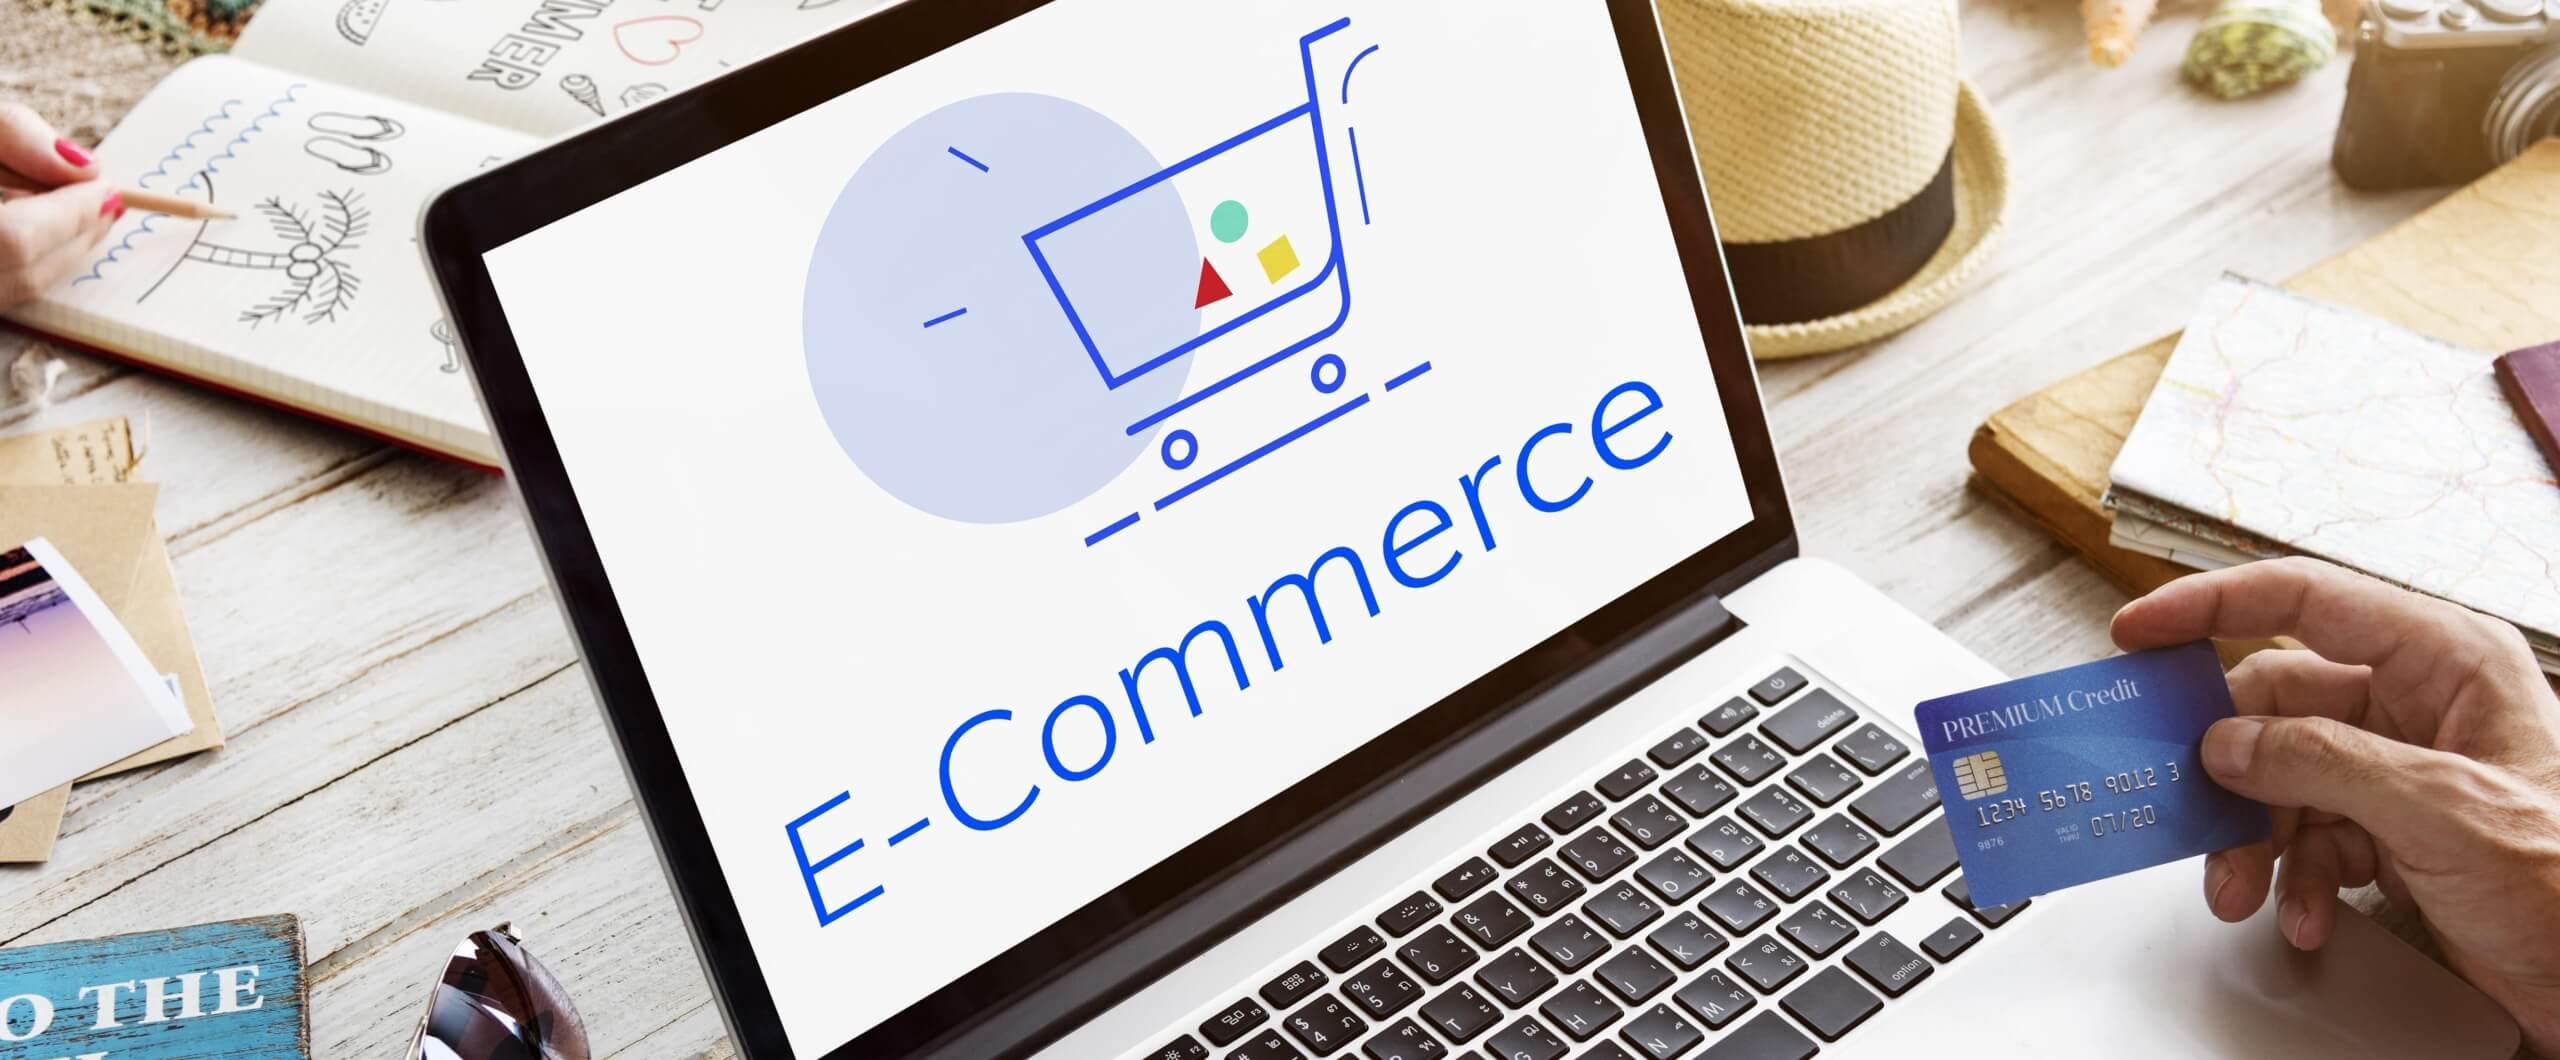 7 Top Website Builders for E-Commerce Growth Revealed